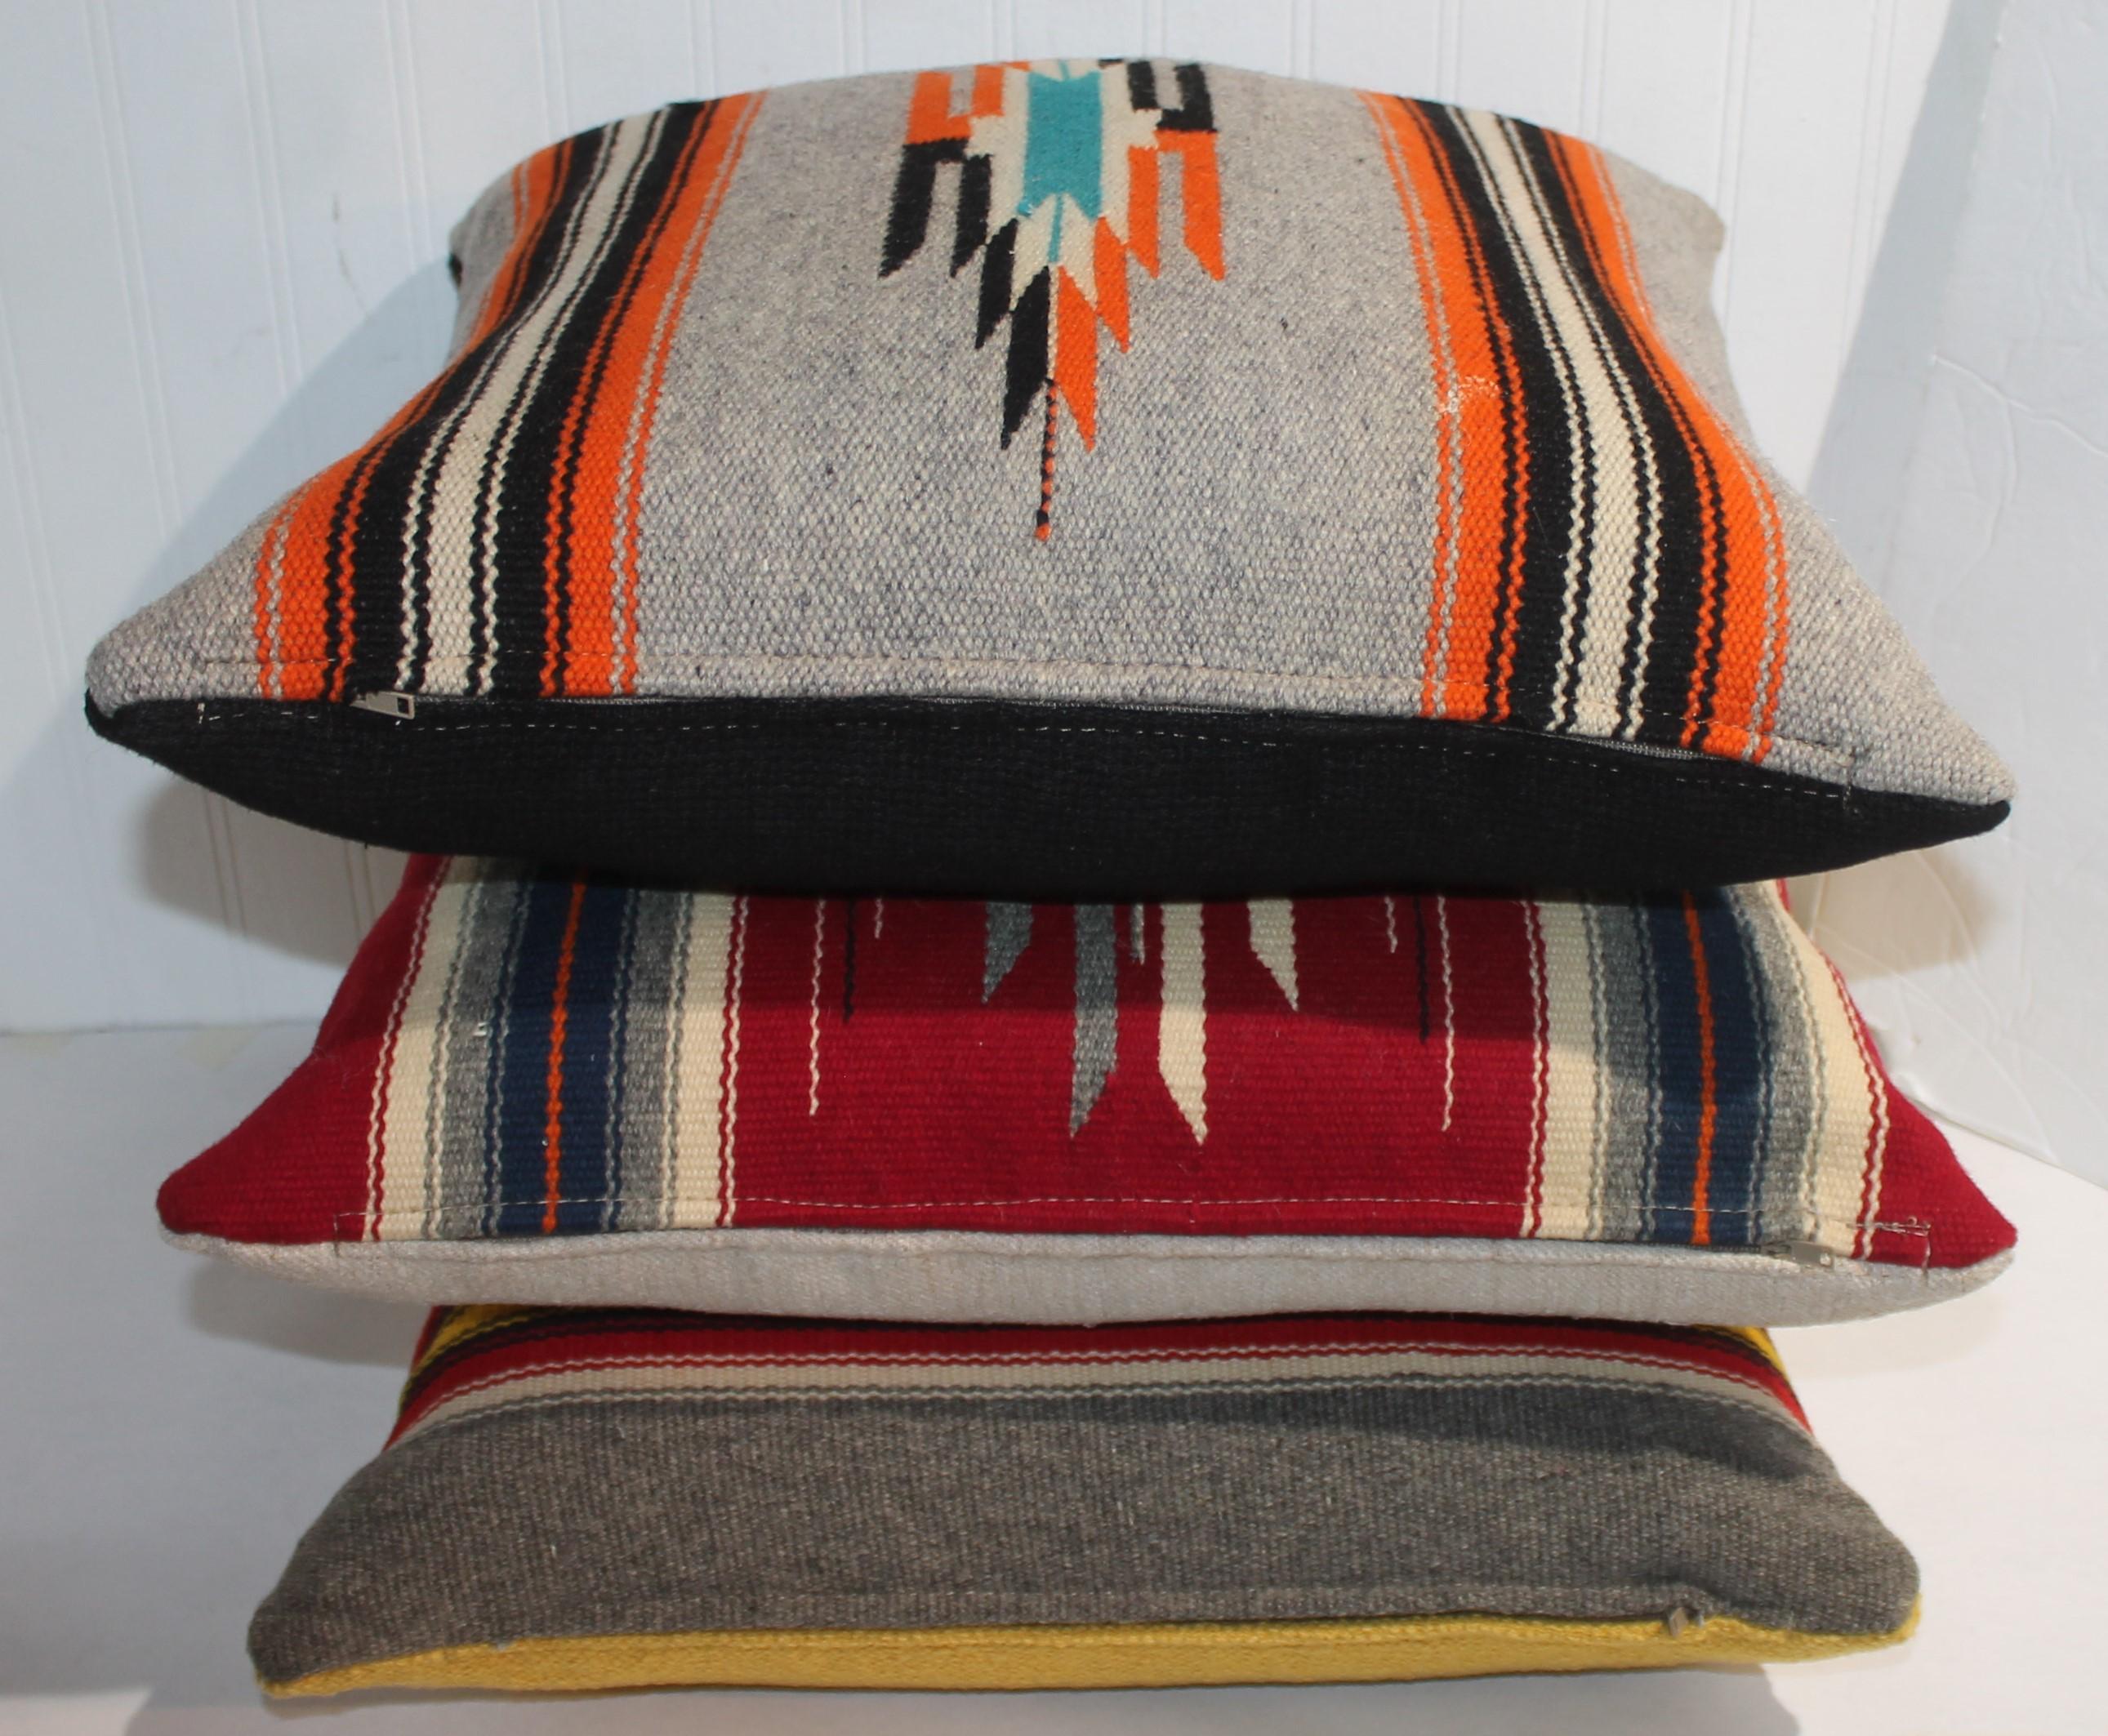 We are offering a group of three Mexican serape pillows with linen backings.The inserts are down & feather fill with zippers.